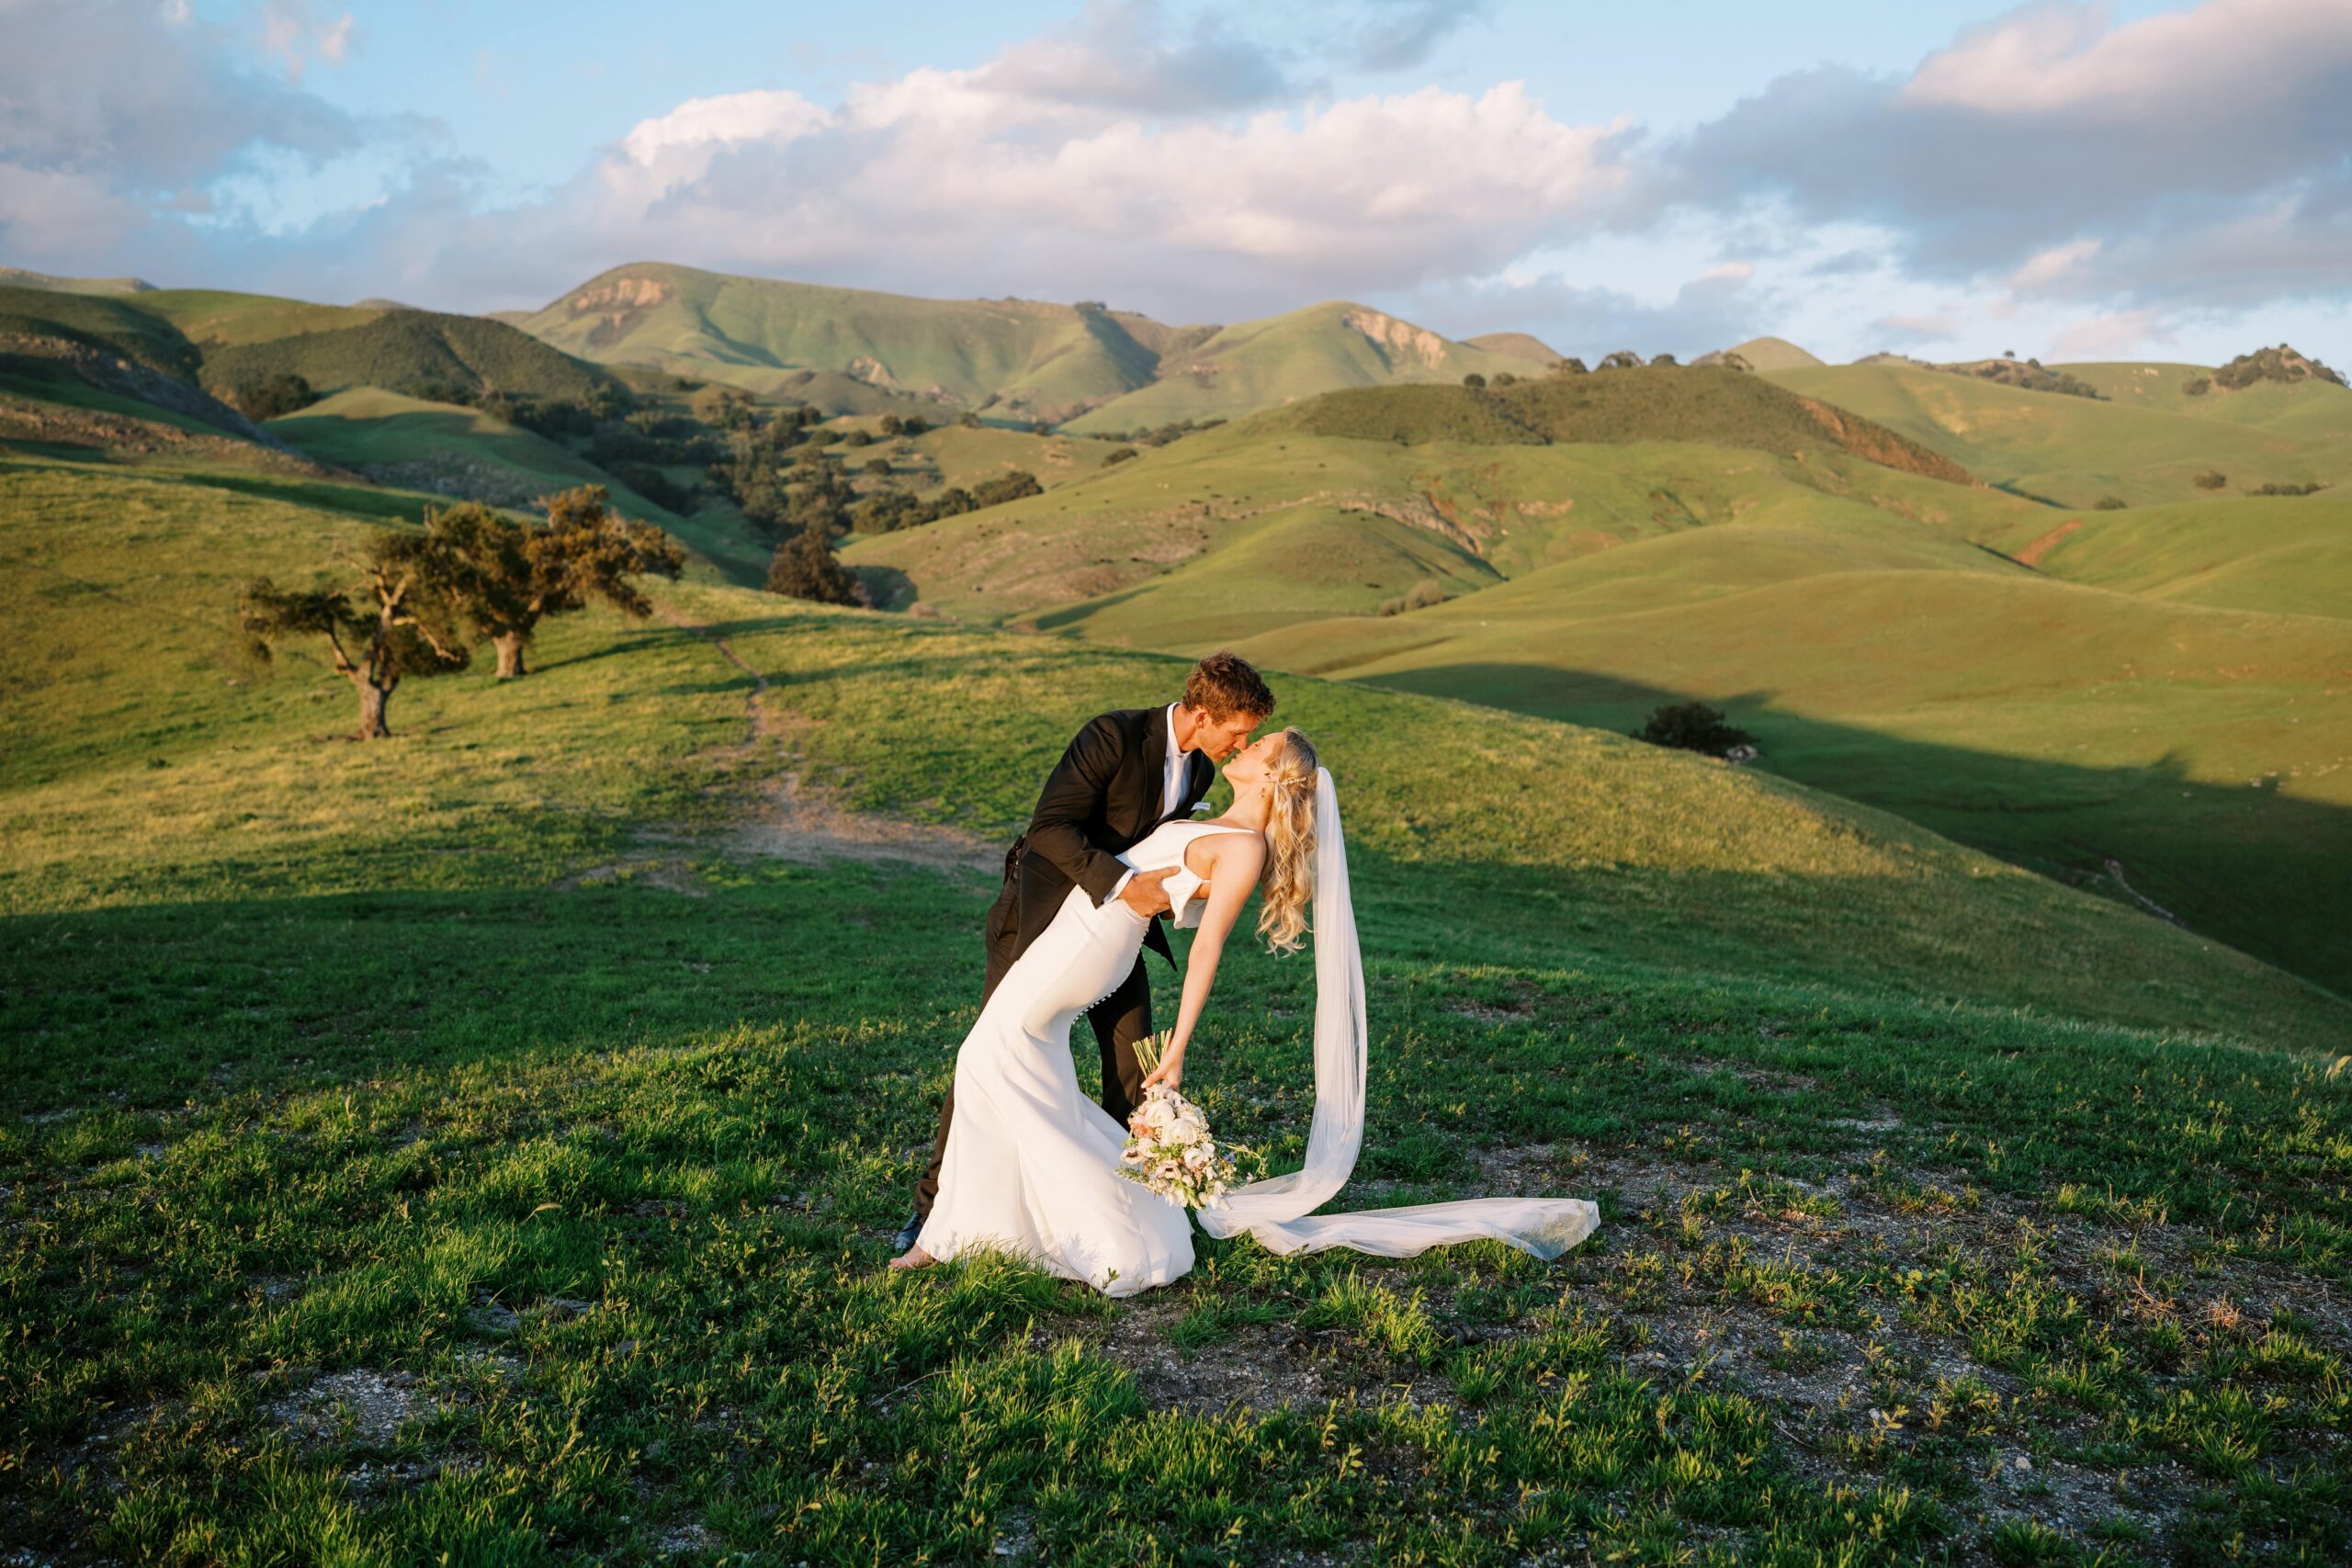 Groom dipping bride during golden hour portrait on a farm